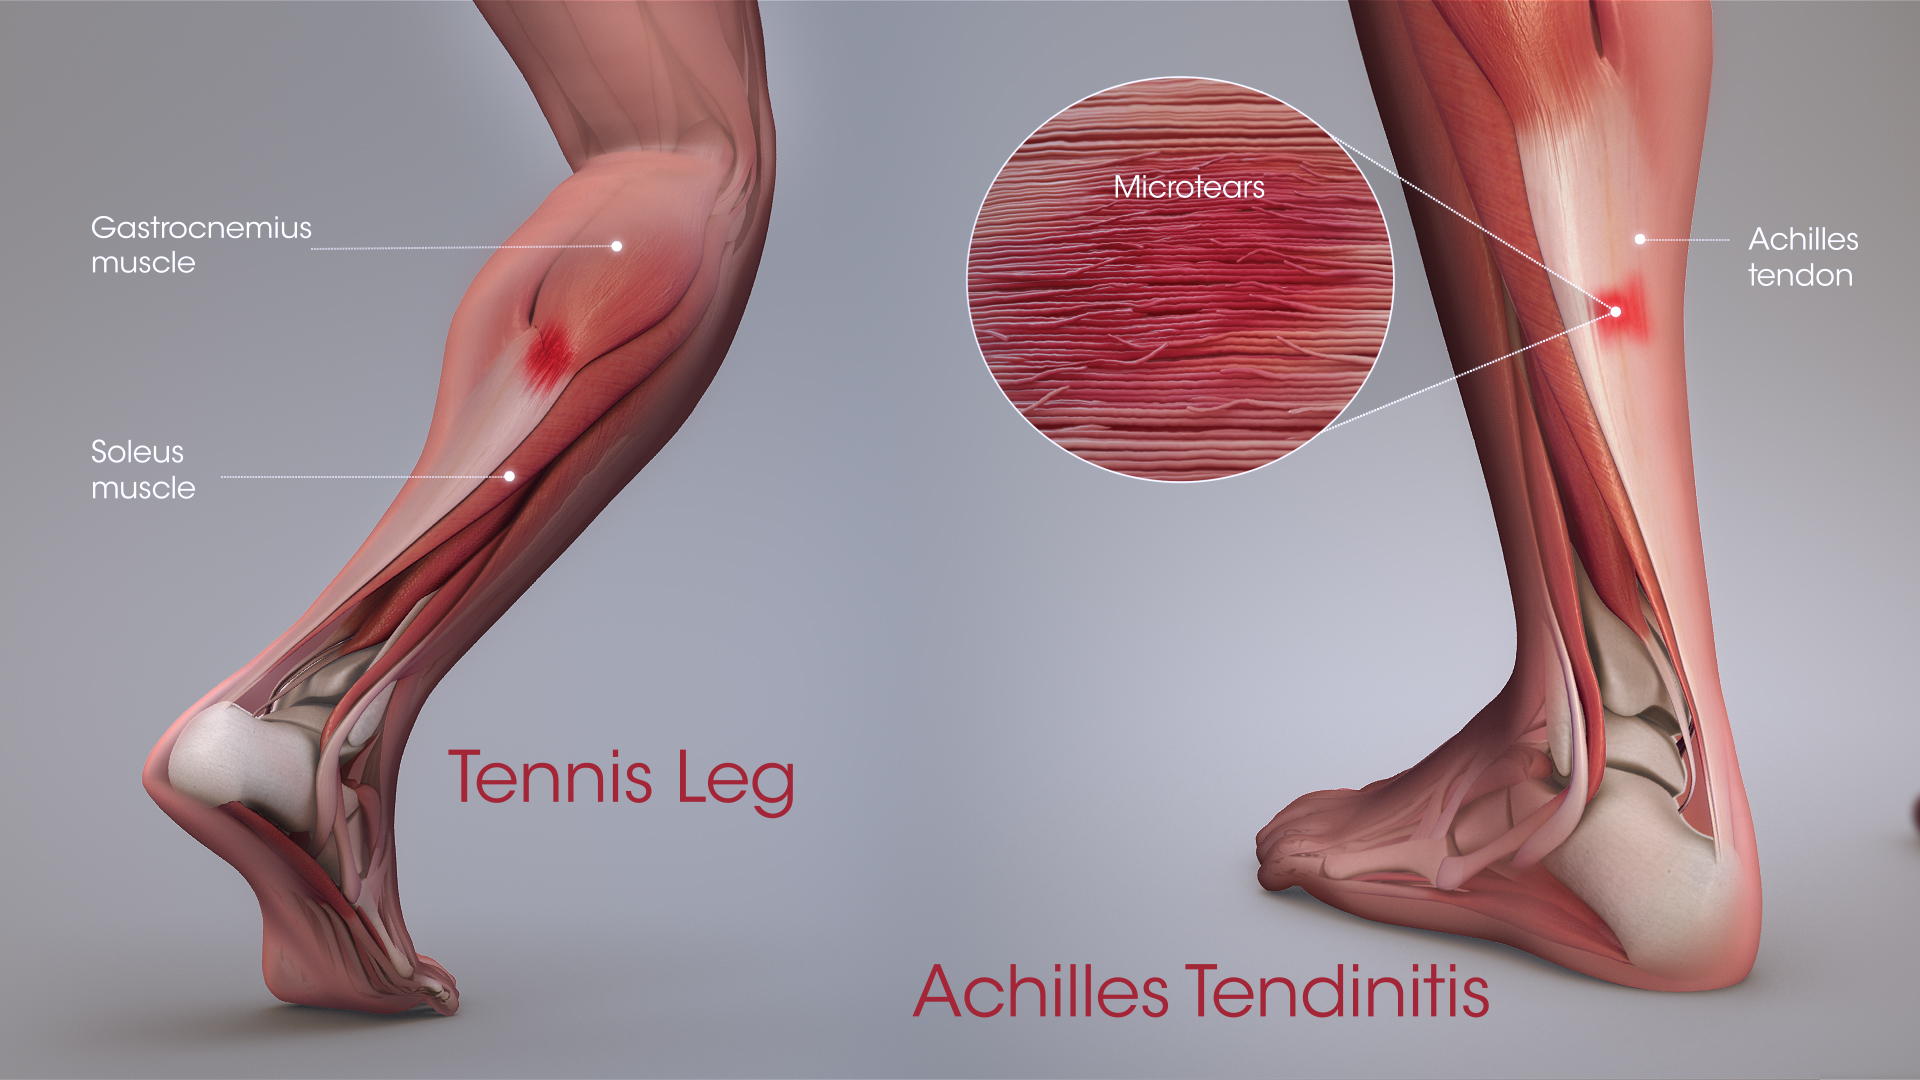 Tennis Leg and Achilles Tendonitis: Confusing The Two Can Be Dangerous